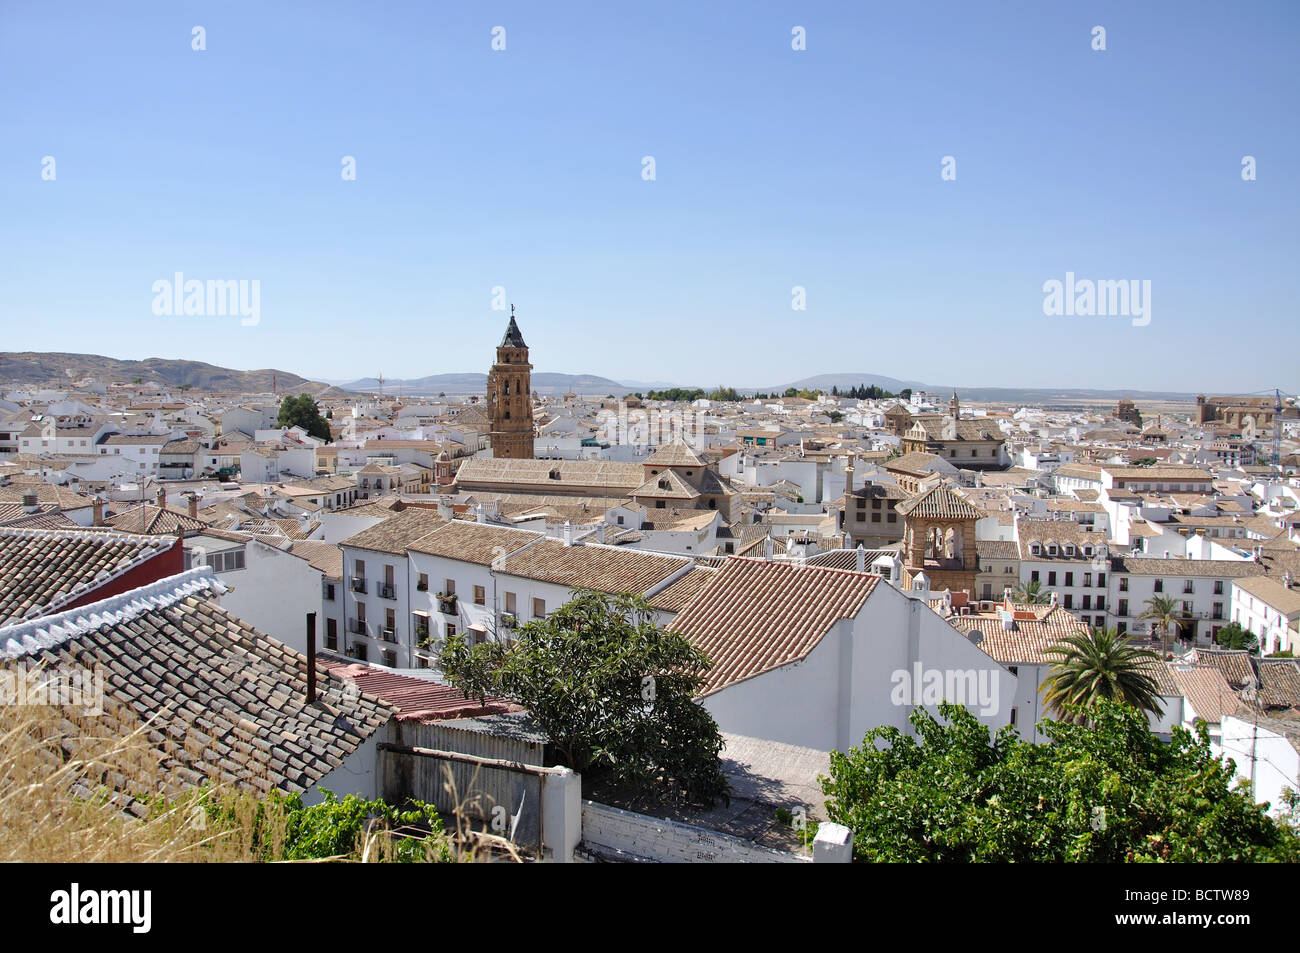 View over city from Castle, Antequera, Malaga Province, Andalusia, Spain Stock Photo